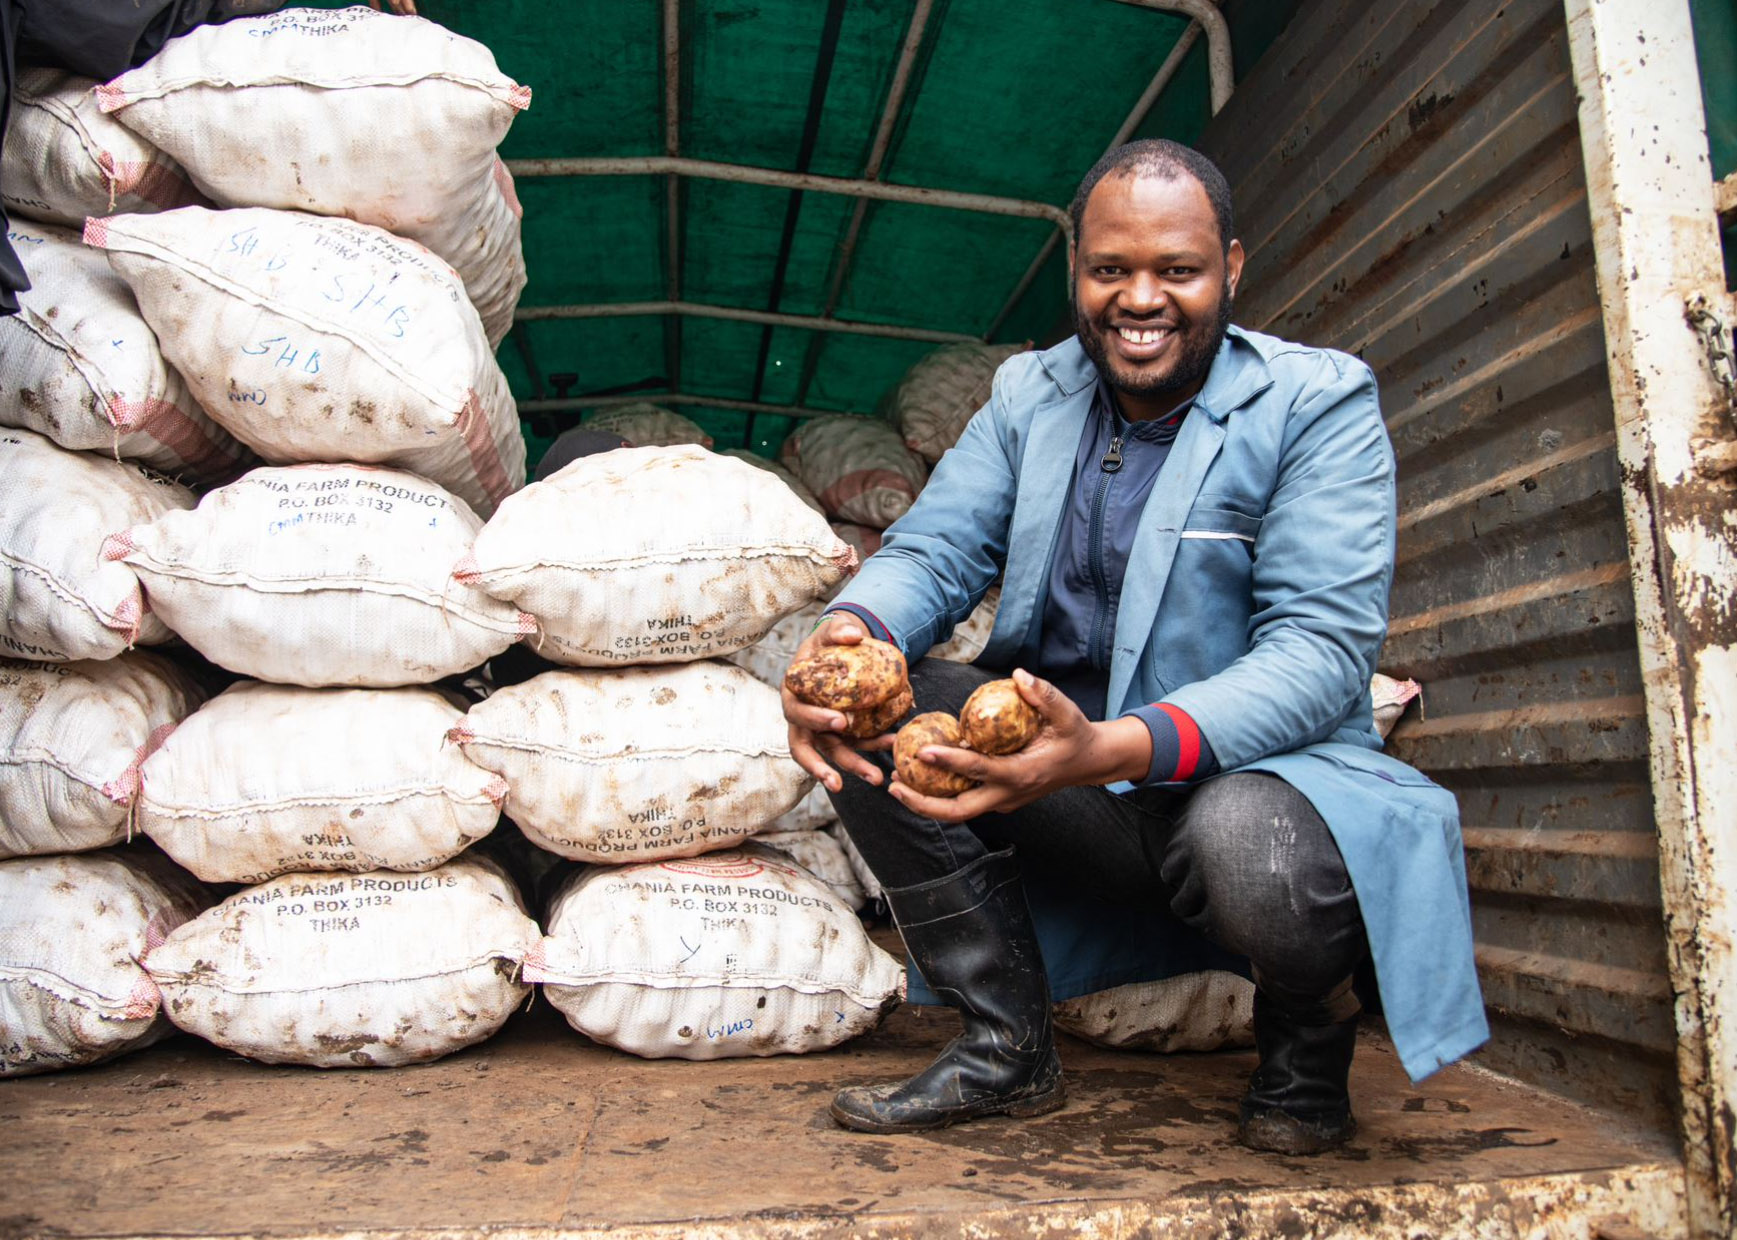 A potato farmer in a blue coat smiling with his produce